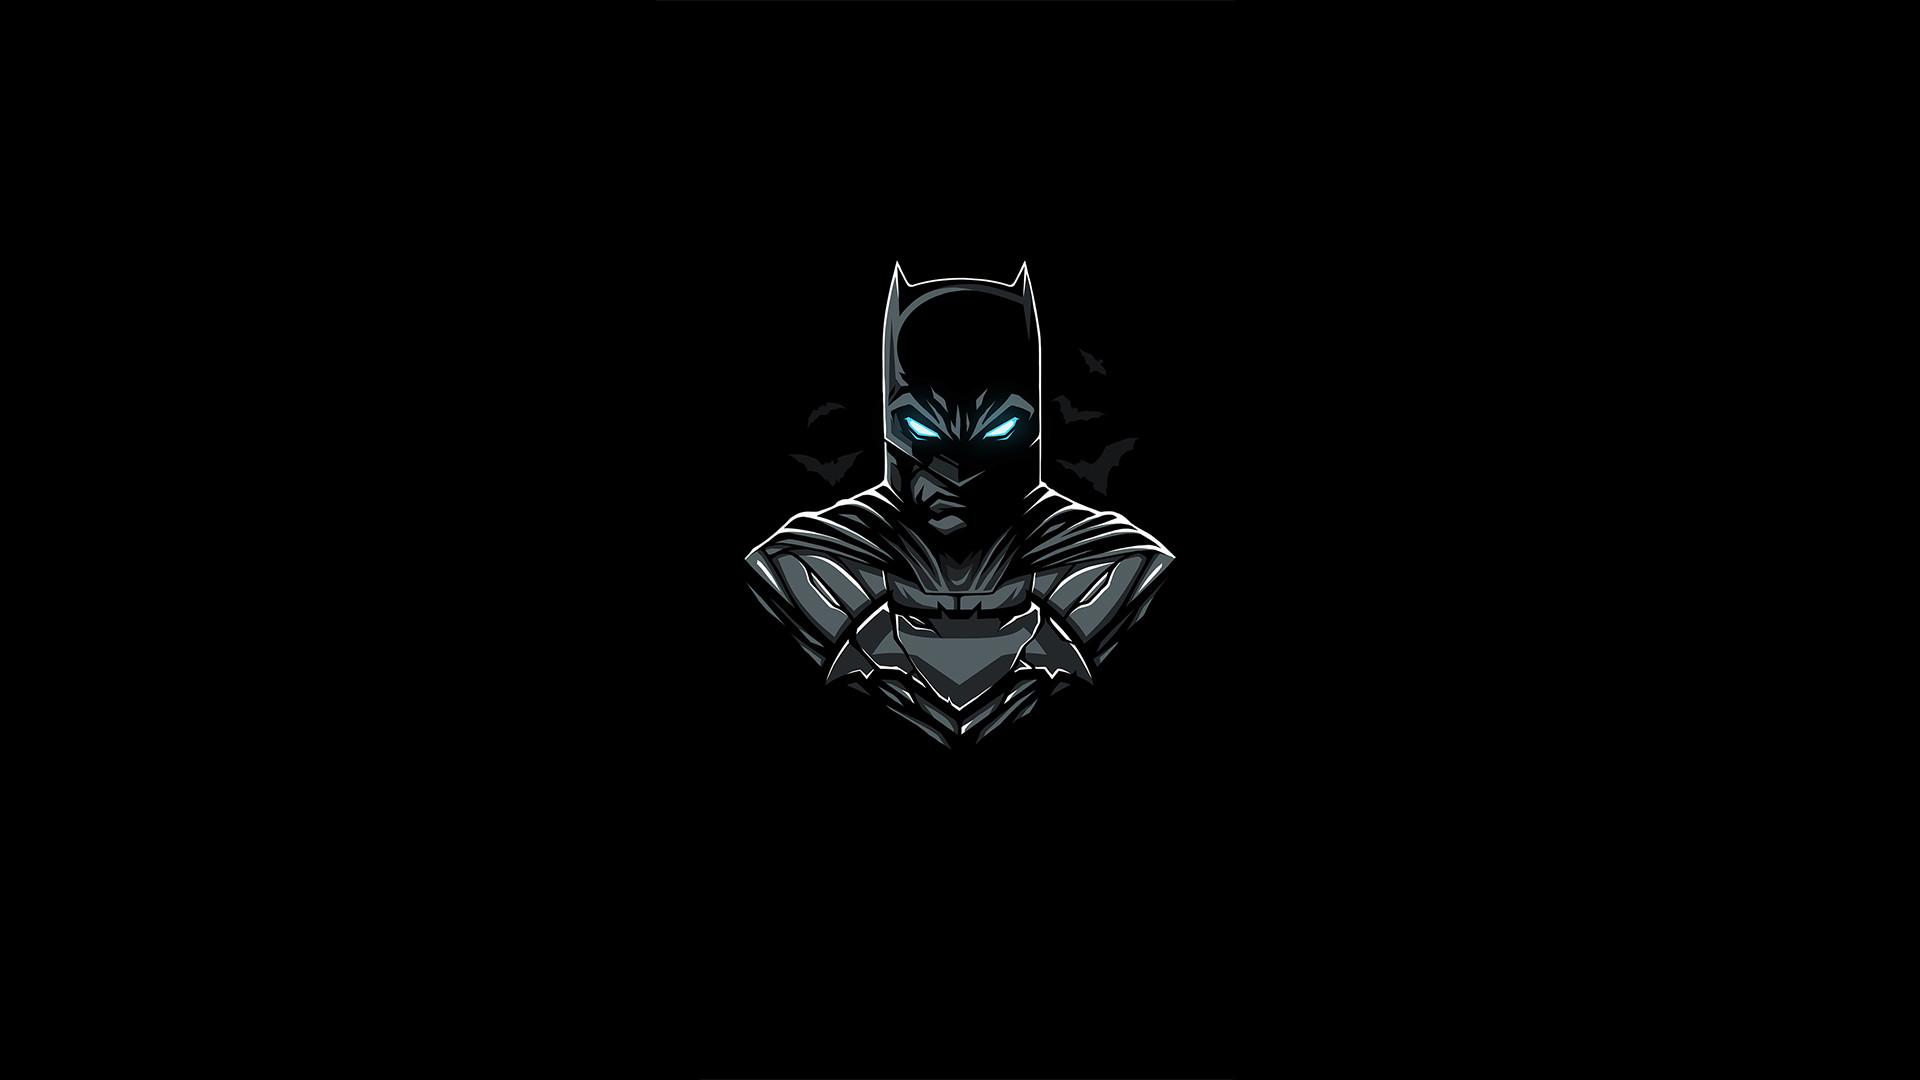 Made By Counterpoint Magazine.. Batman Full HD Wallpaper For Laptop